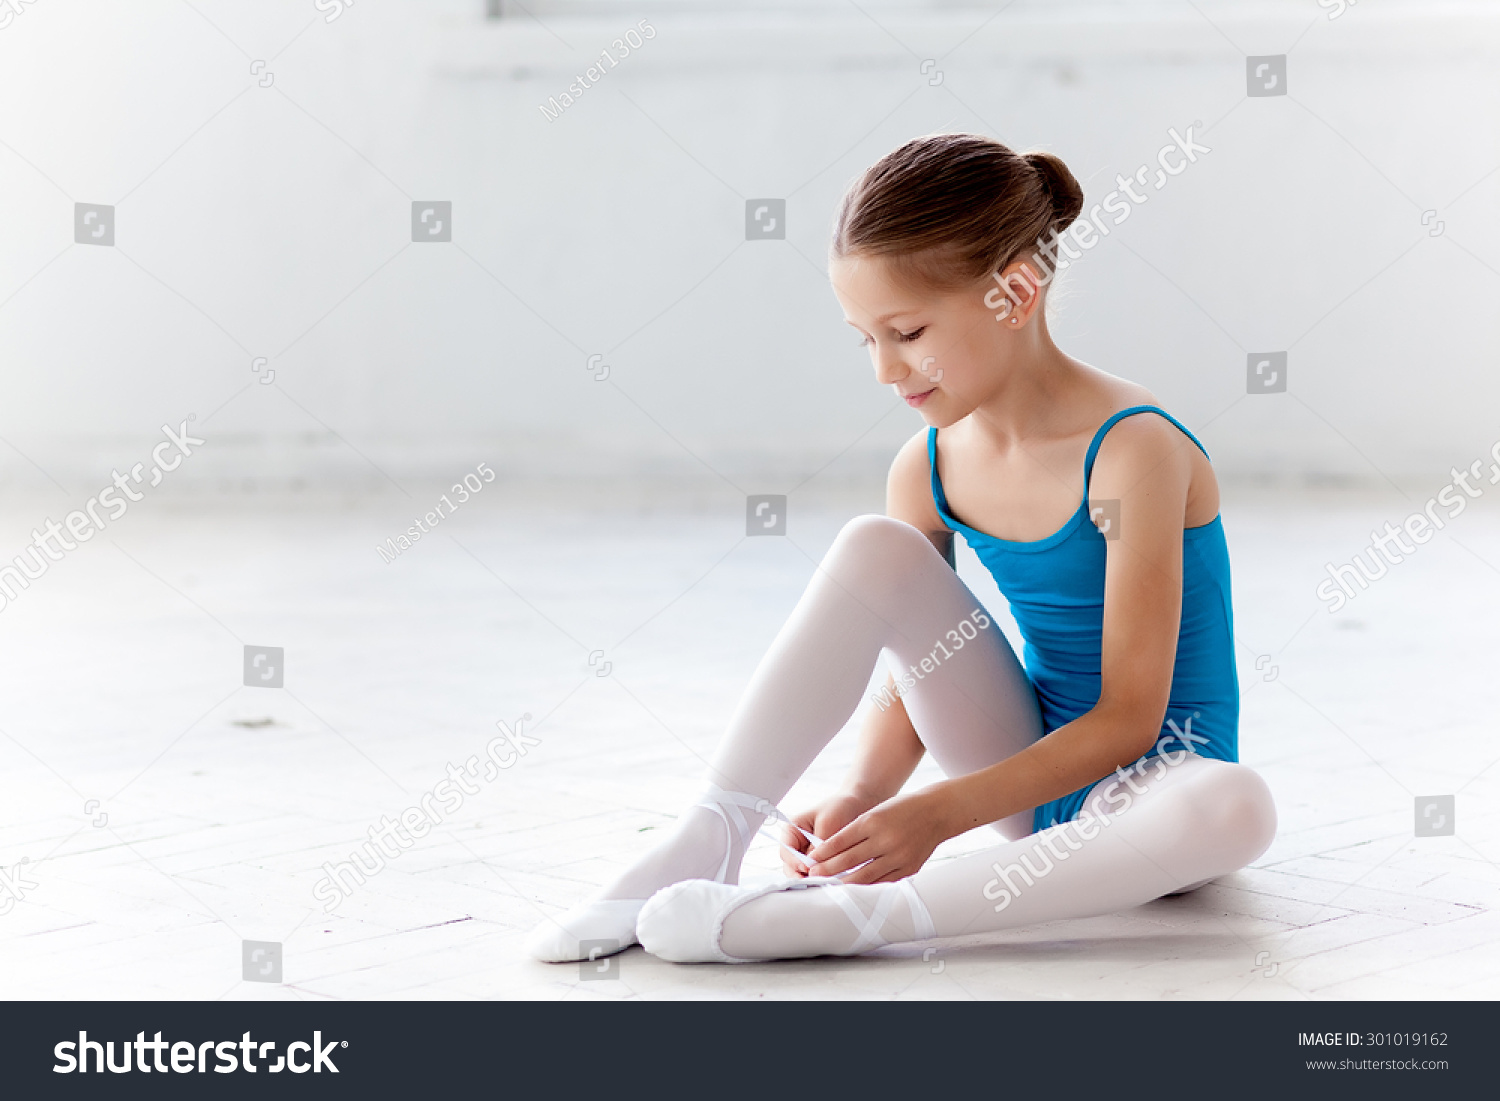 Beautiful Little Ballerina In Blue Dress For Dancing Sitting On The ...